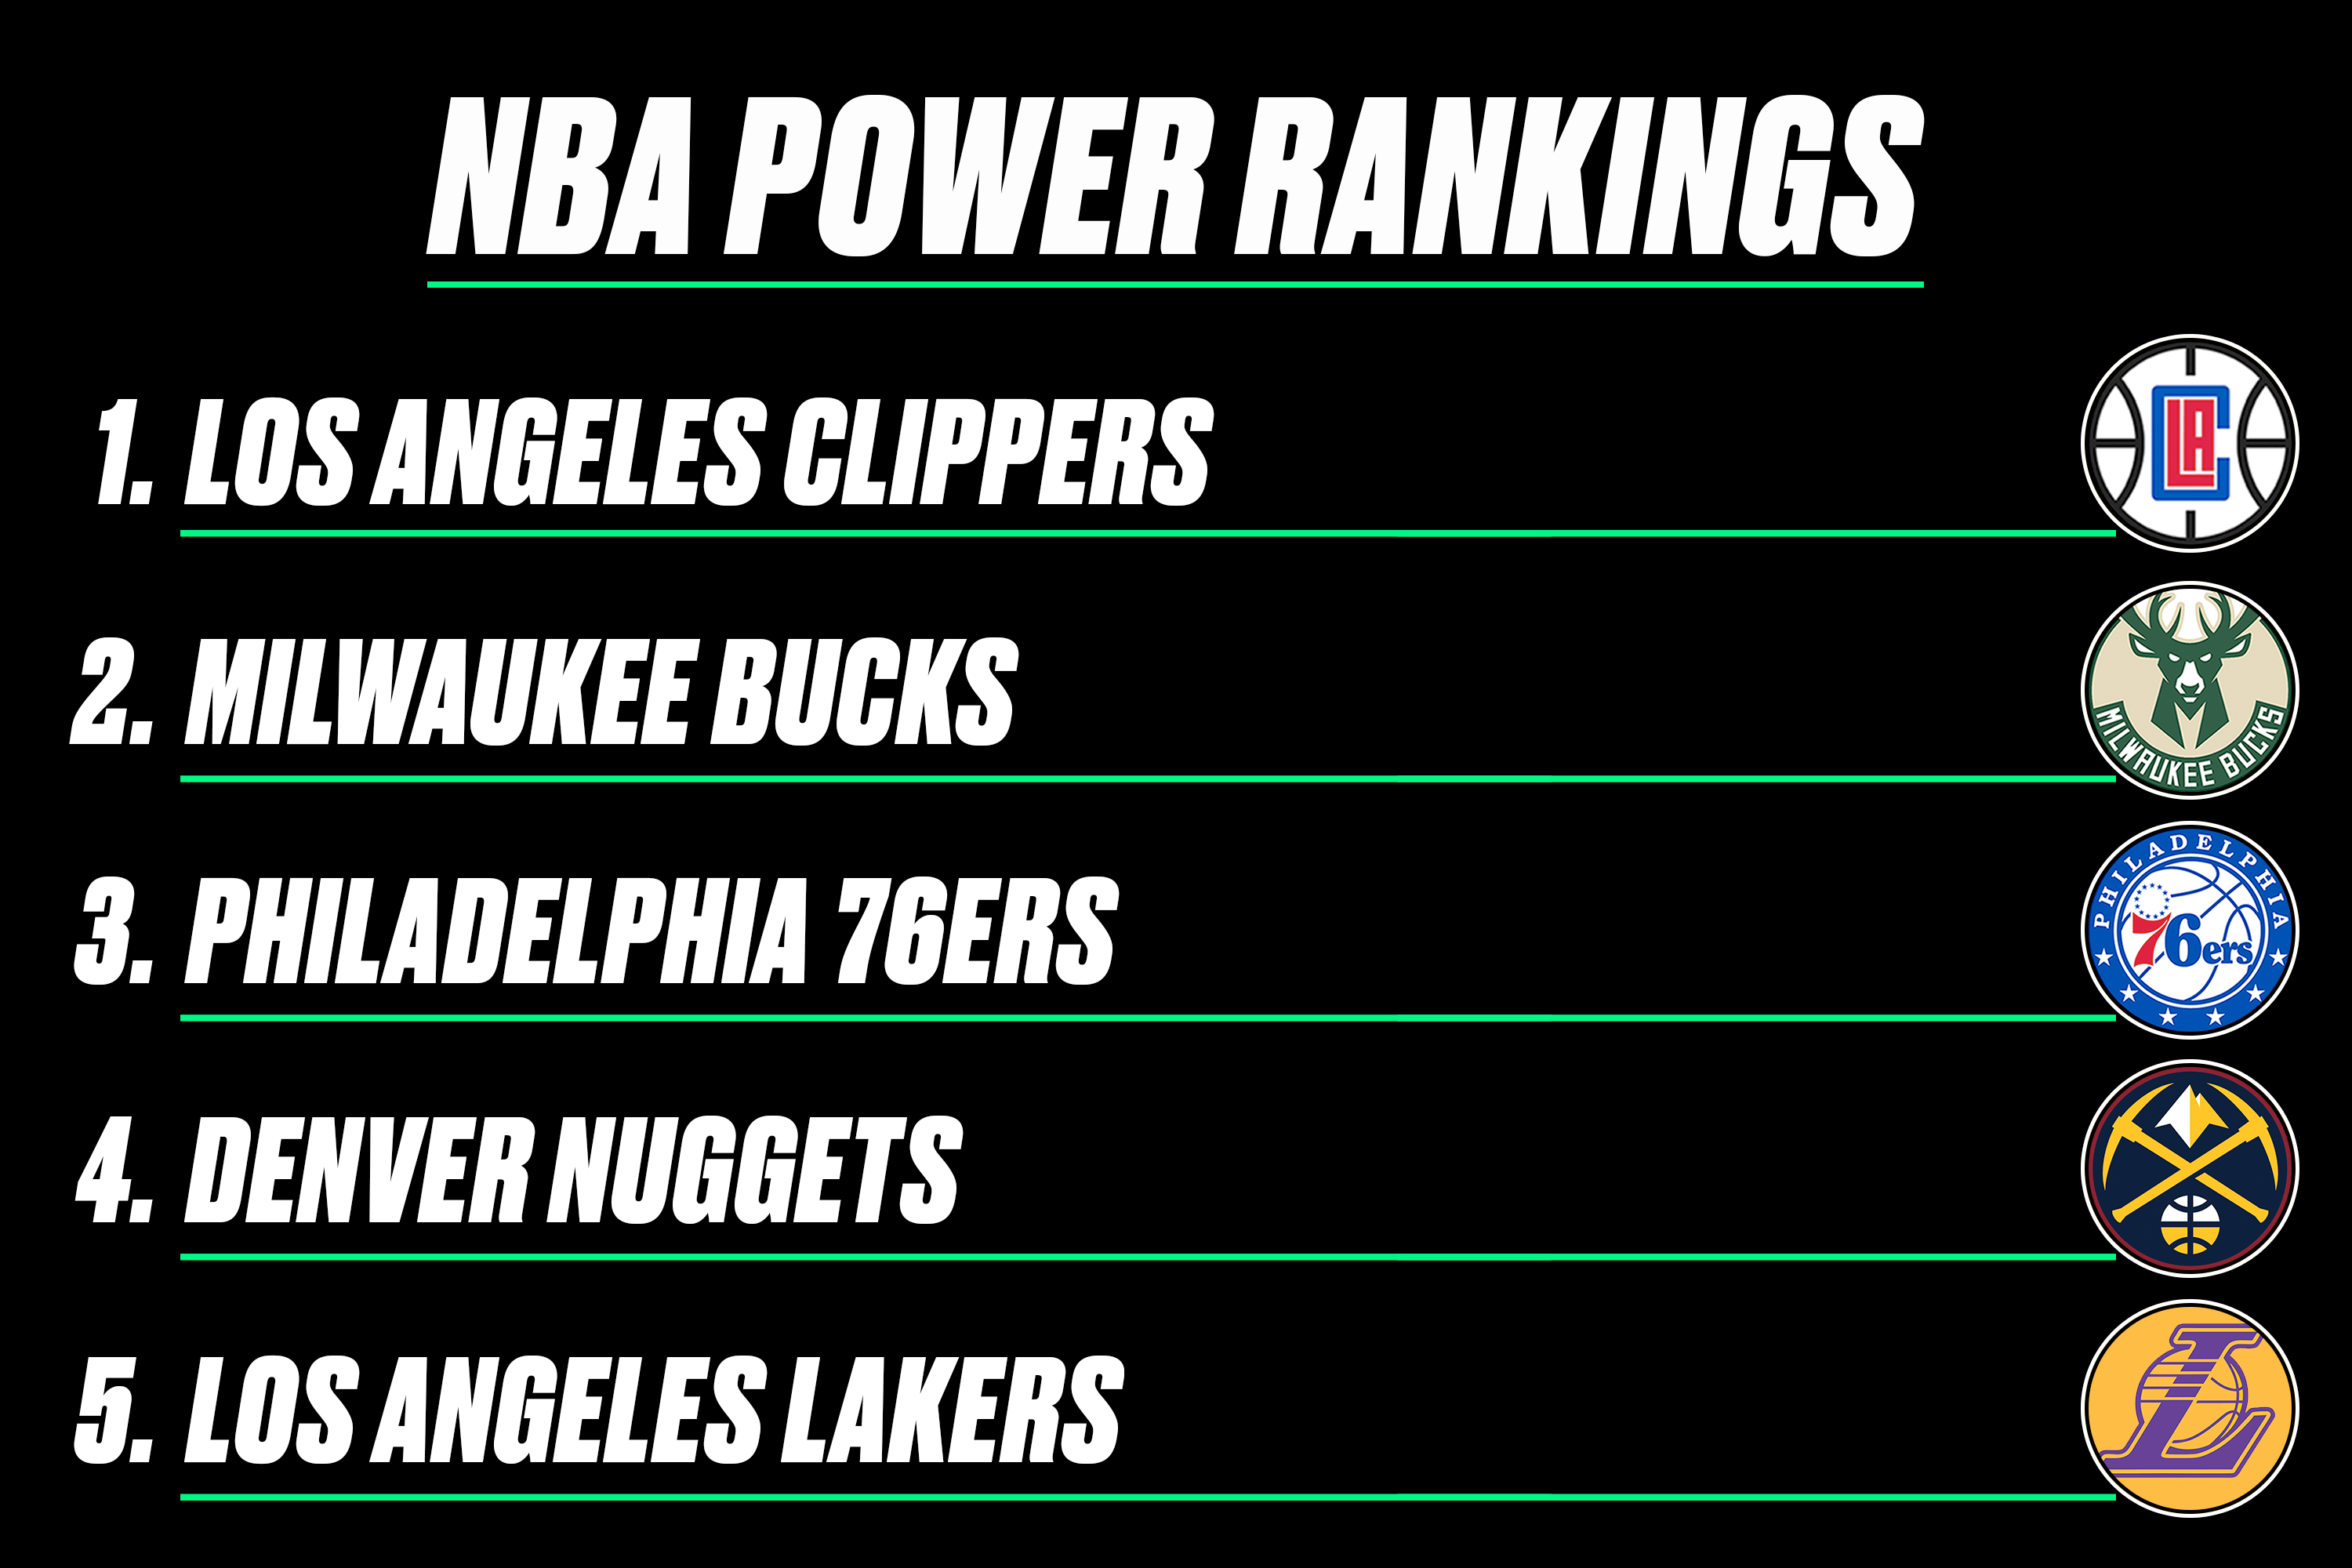 Nba Power Rankings Los Angeles Clippers Lead The Way 1 Week Into 2019 20 Season Bleacher Report Latest News Videos And Highlights